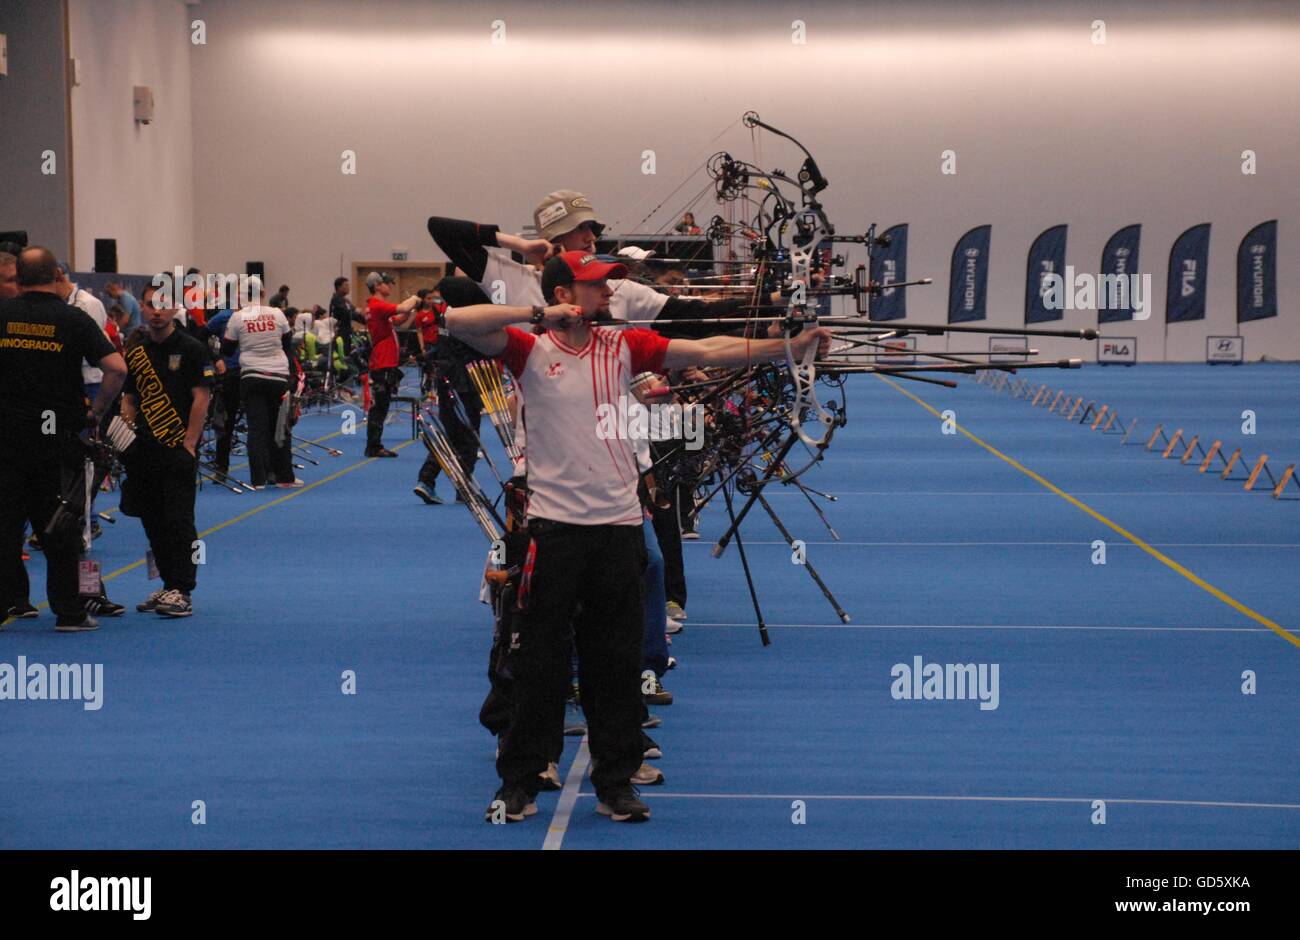 The last indoor event of the 2015-16 winter season '2016 World Archery Indoor Championships' at the ATO Congresium Hall. Stock Photo